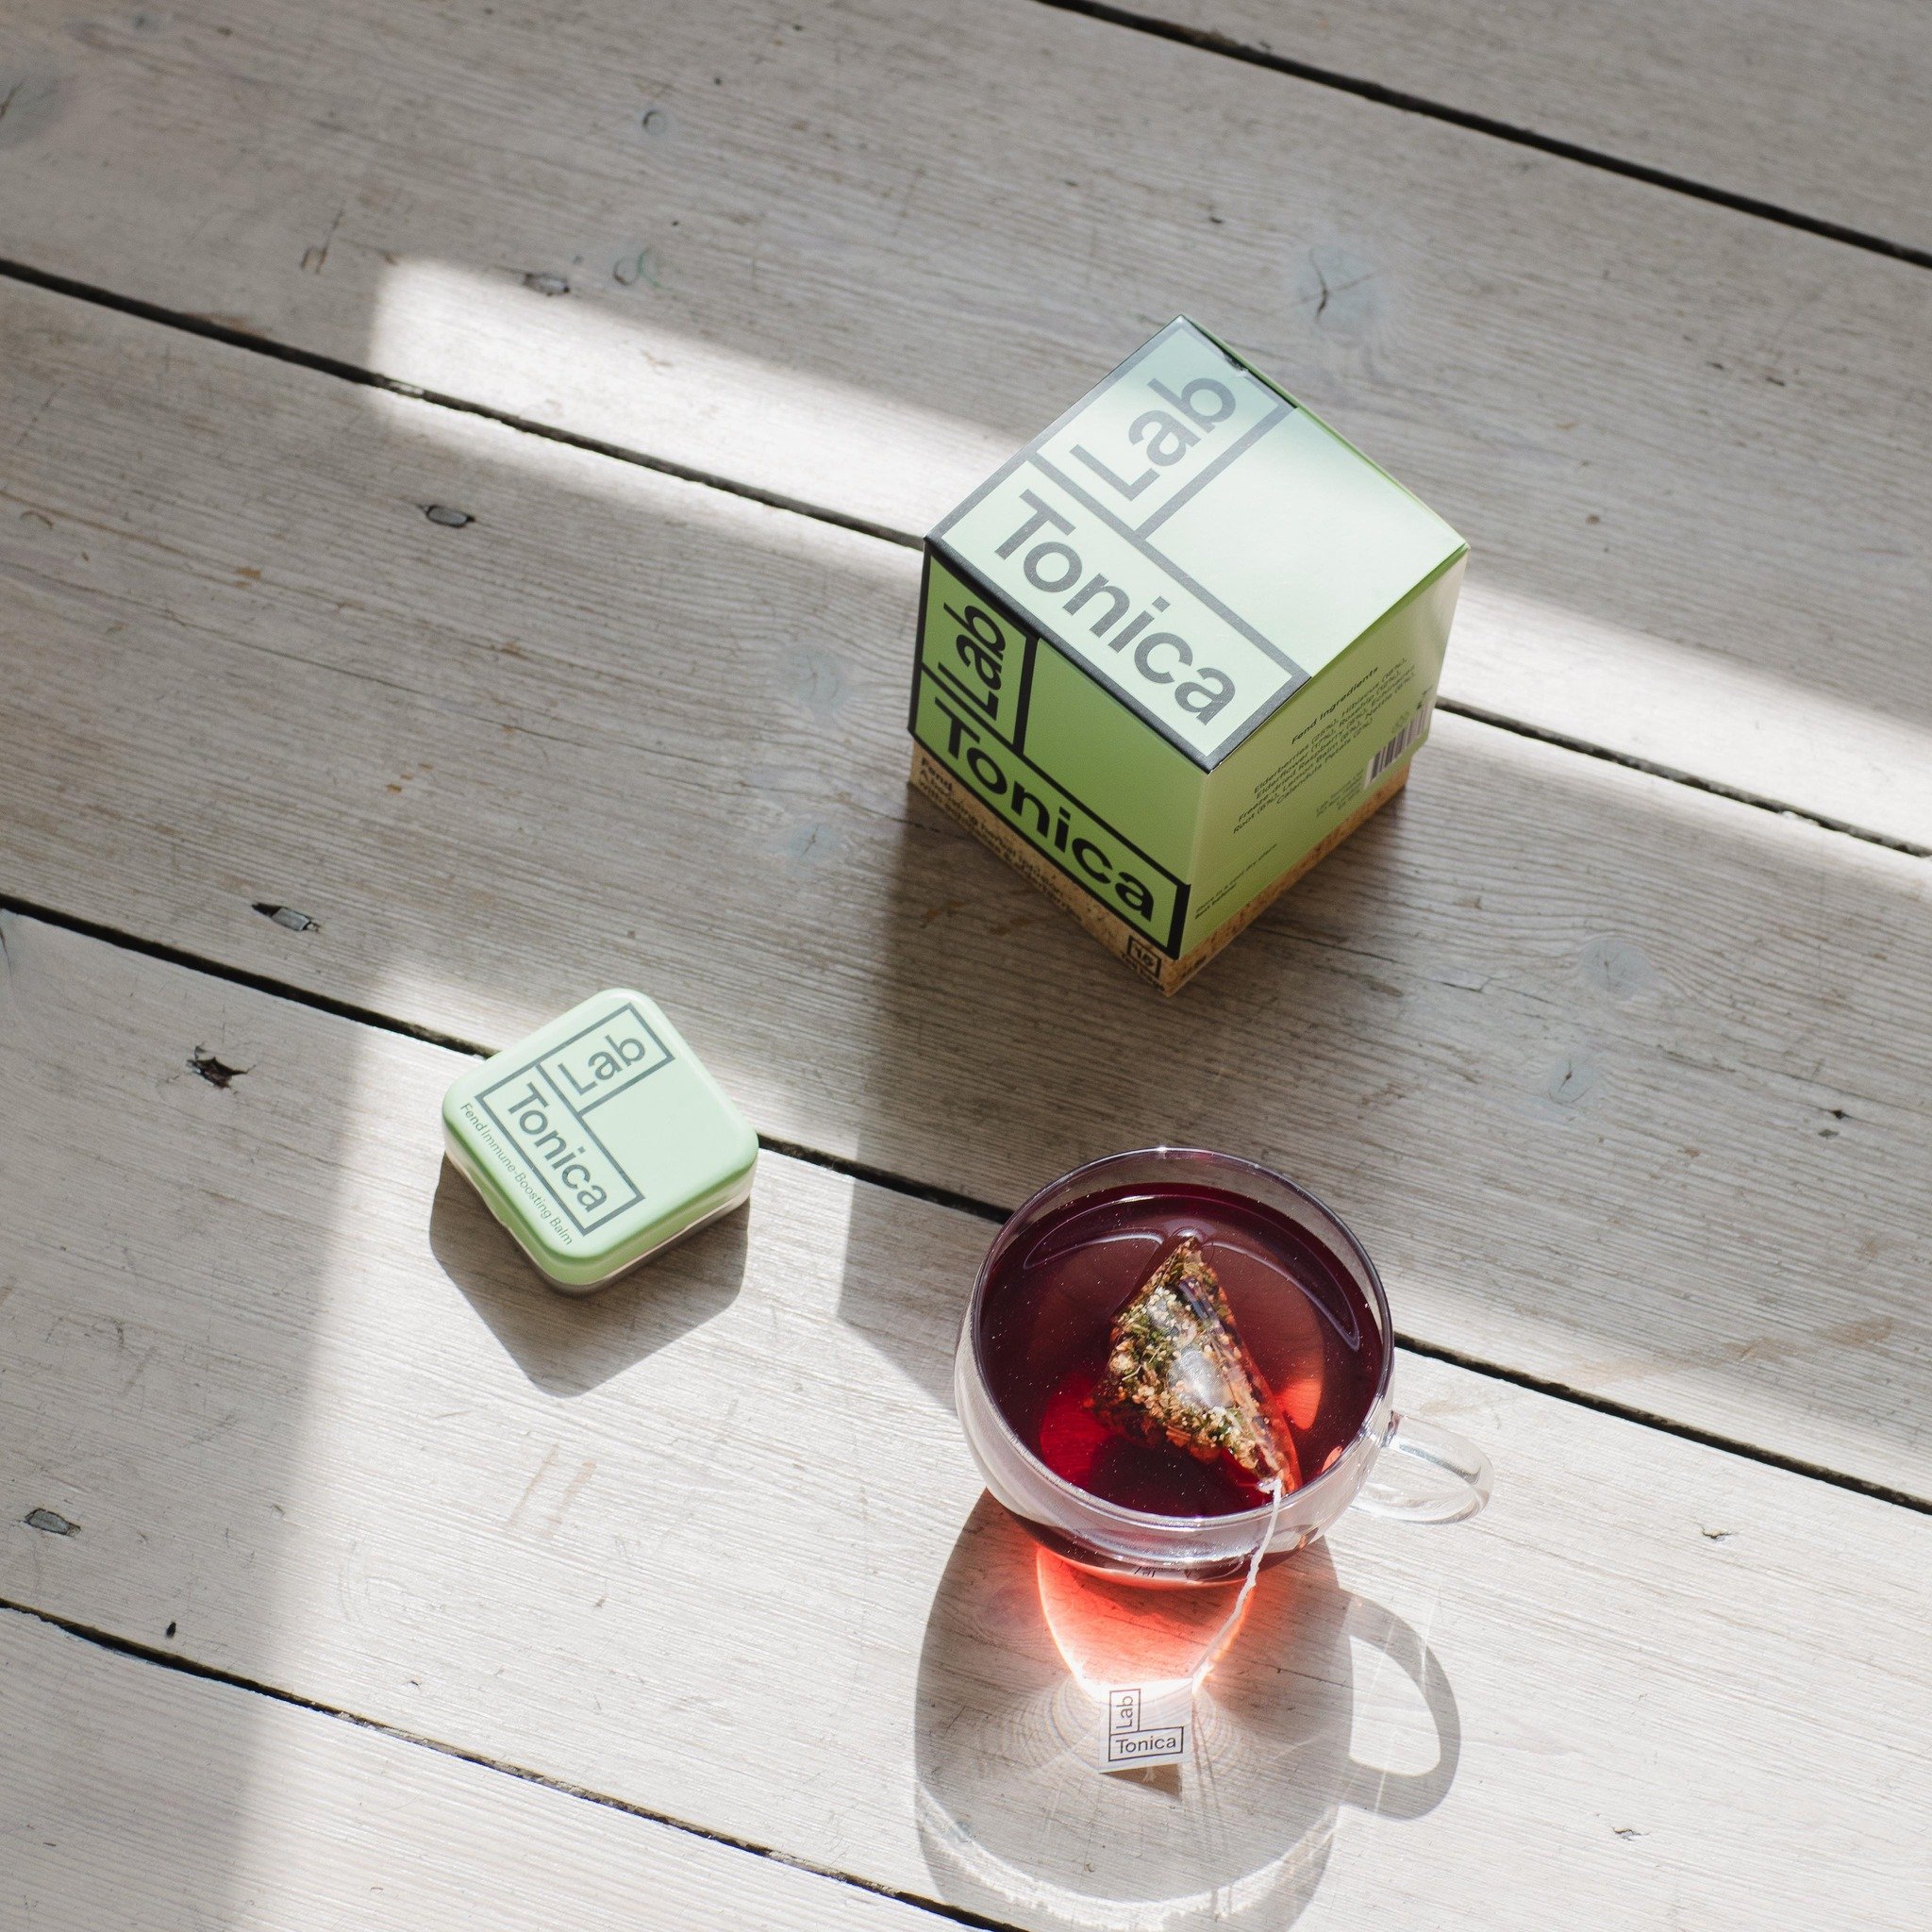 💚Fend, Spring cleanse.💚
Fend herbal tea is my go to for an all round pick me up. Packed with immune supporting herbs, elderberry, elderflower, nettle, echinacea, rosehips, calendula and raspberry. This fruity fortifying cup is sure to put a spring 